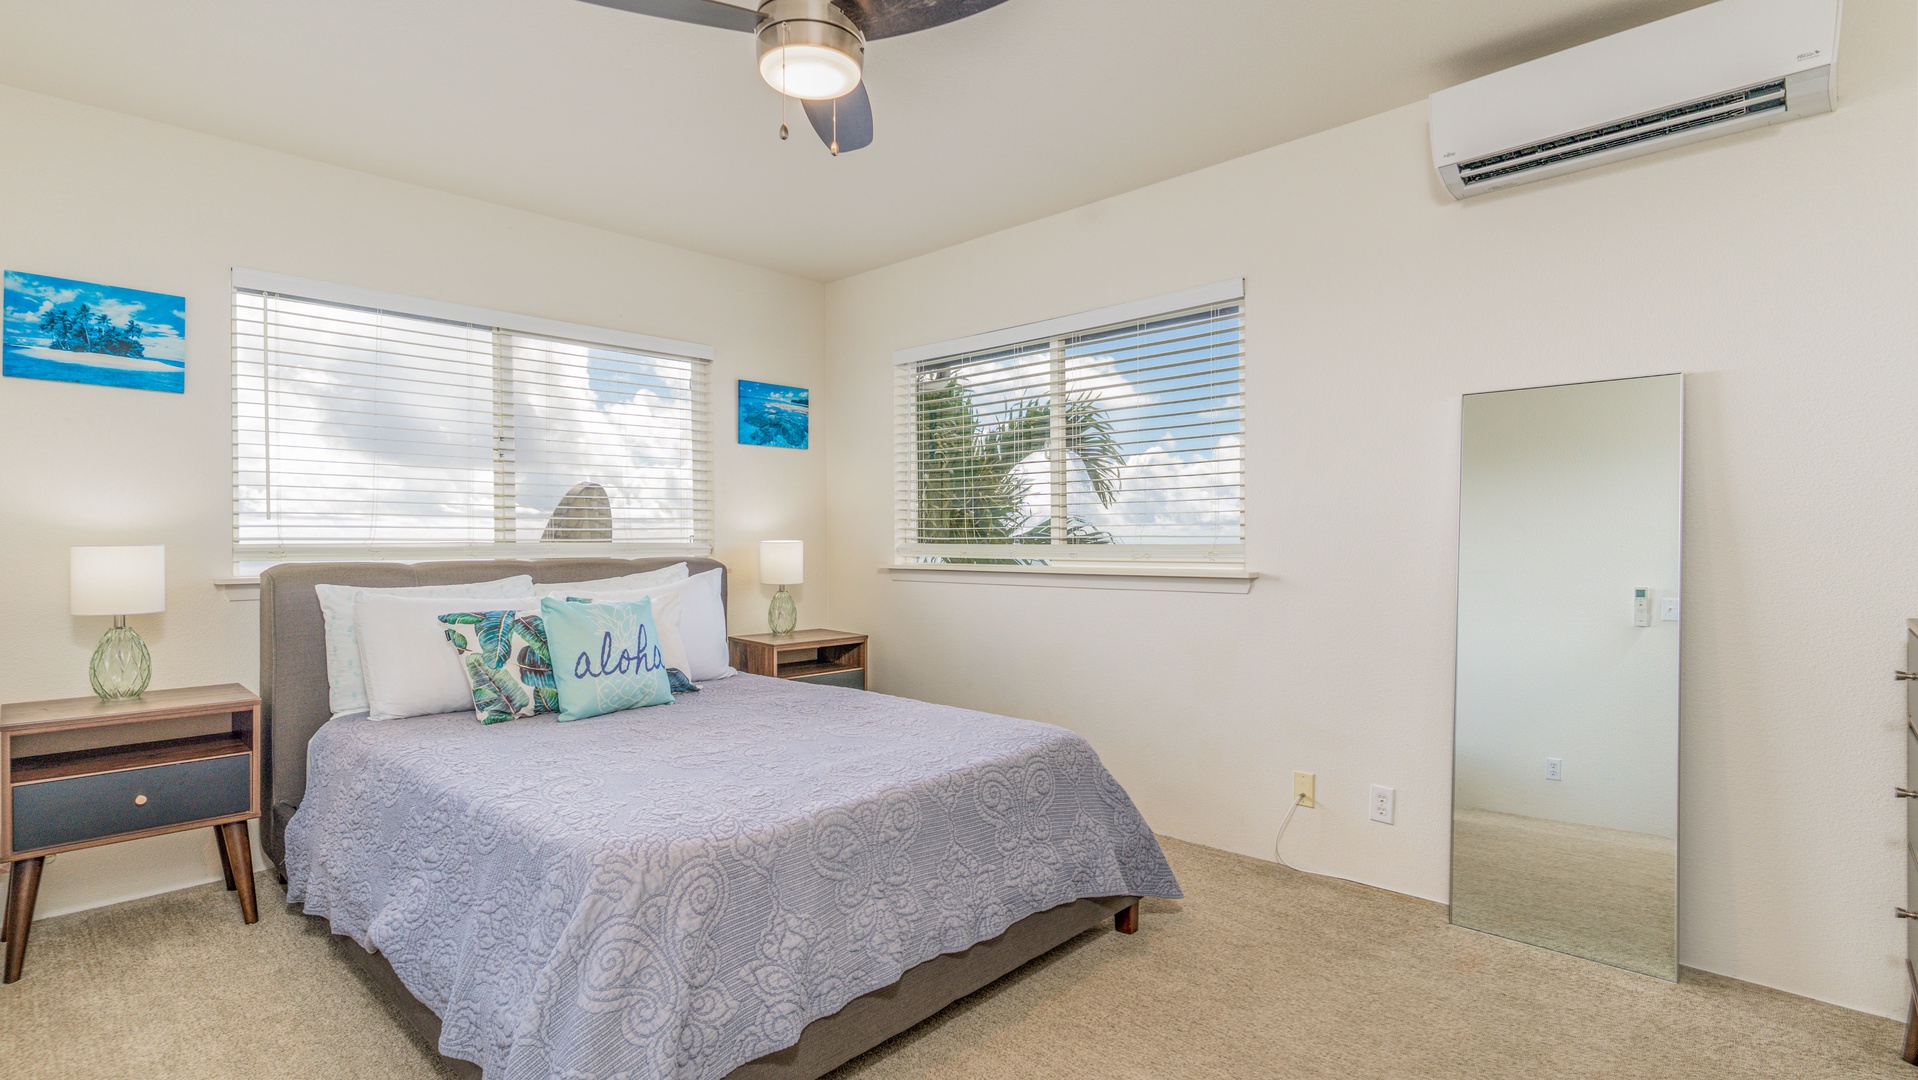 Kapolei Vacation Rentals, Makakilo Elele 48 - Primary bedroom with a cozy queen bed with lots of natural lights and views.